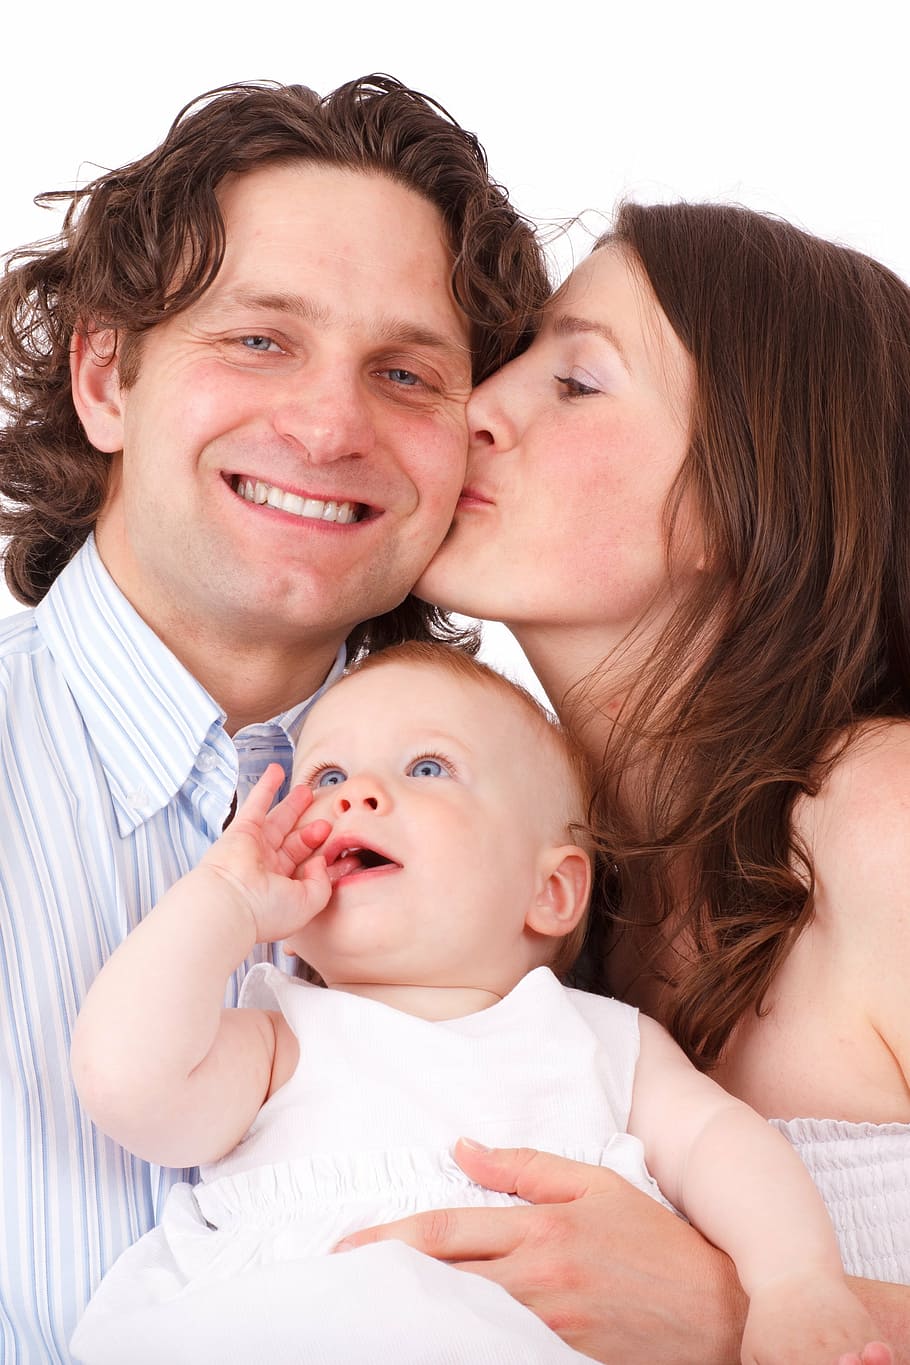 family photo, baby, child, face, family, father, group, happiness, happy, kiss